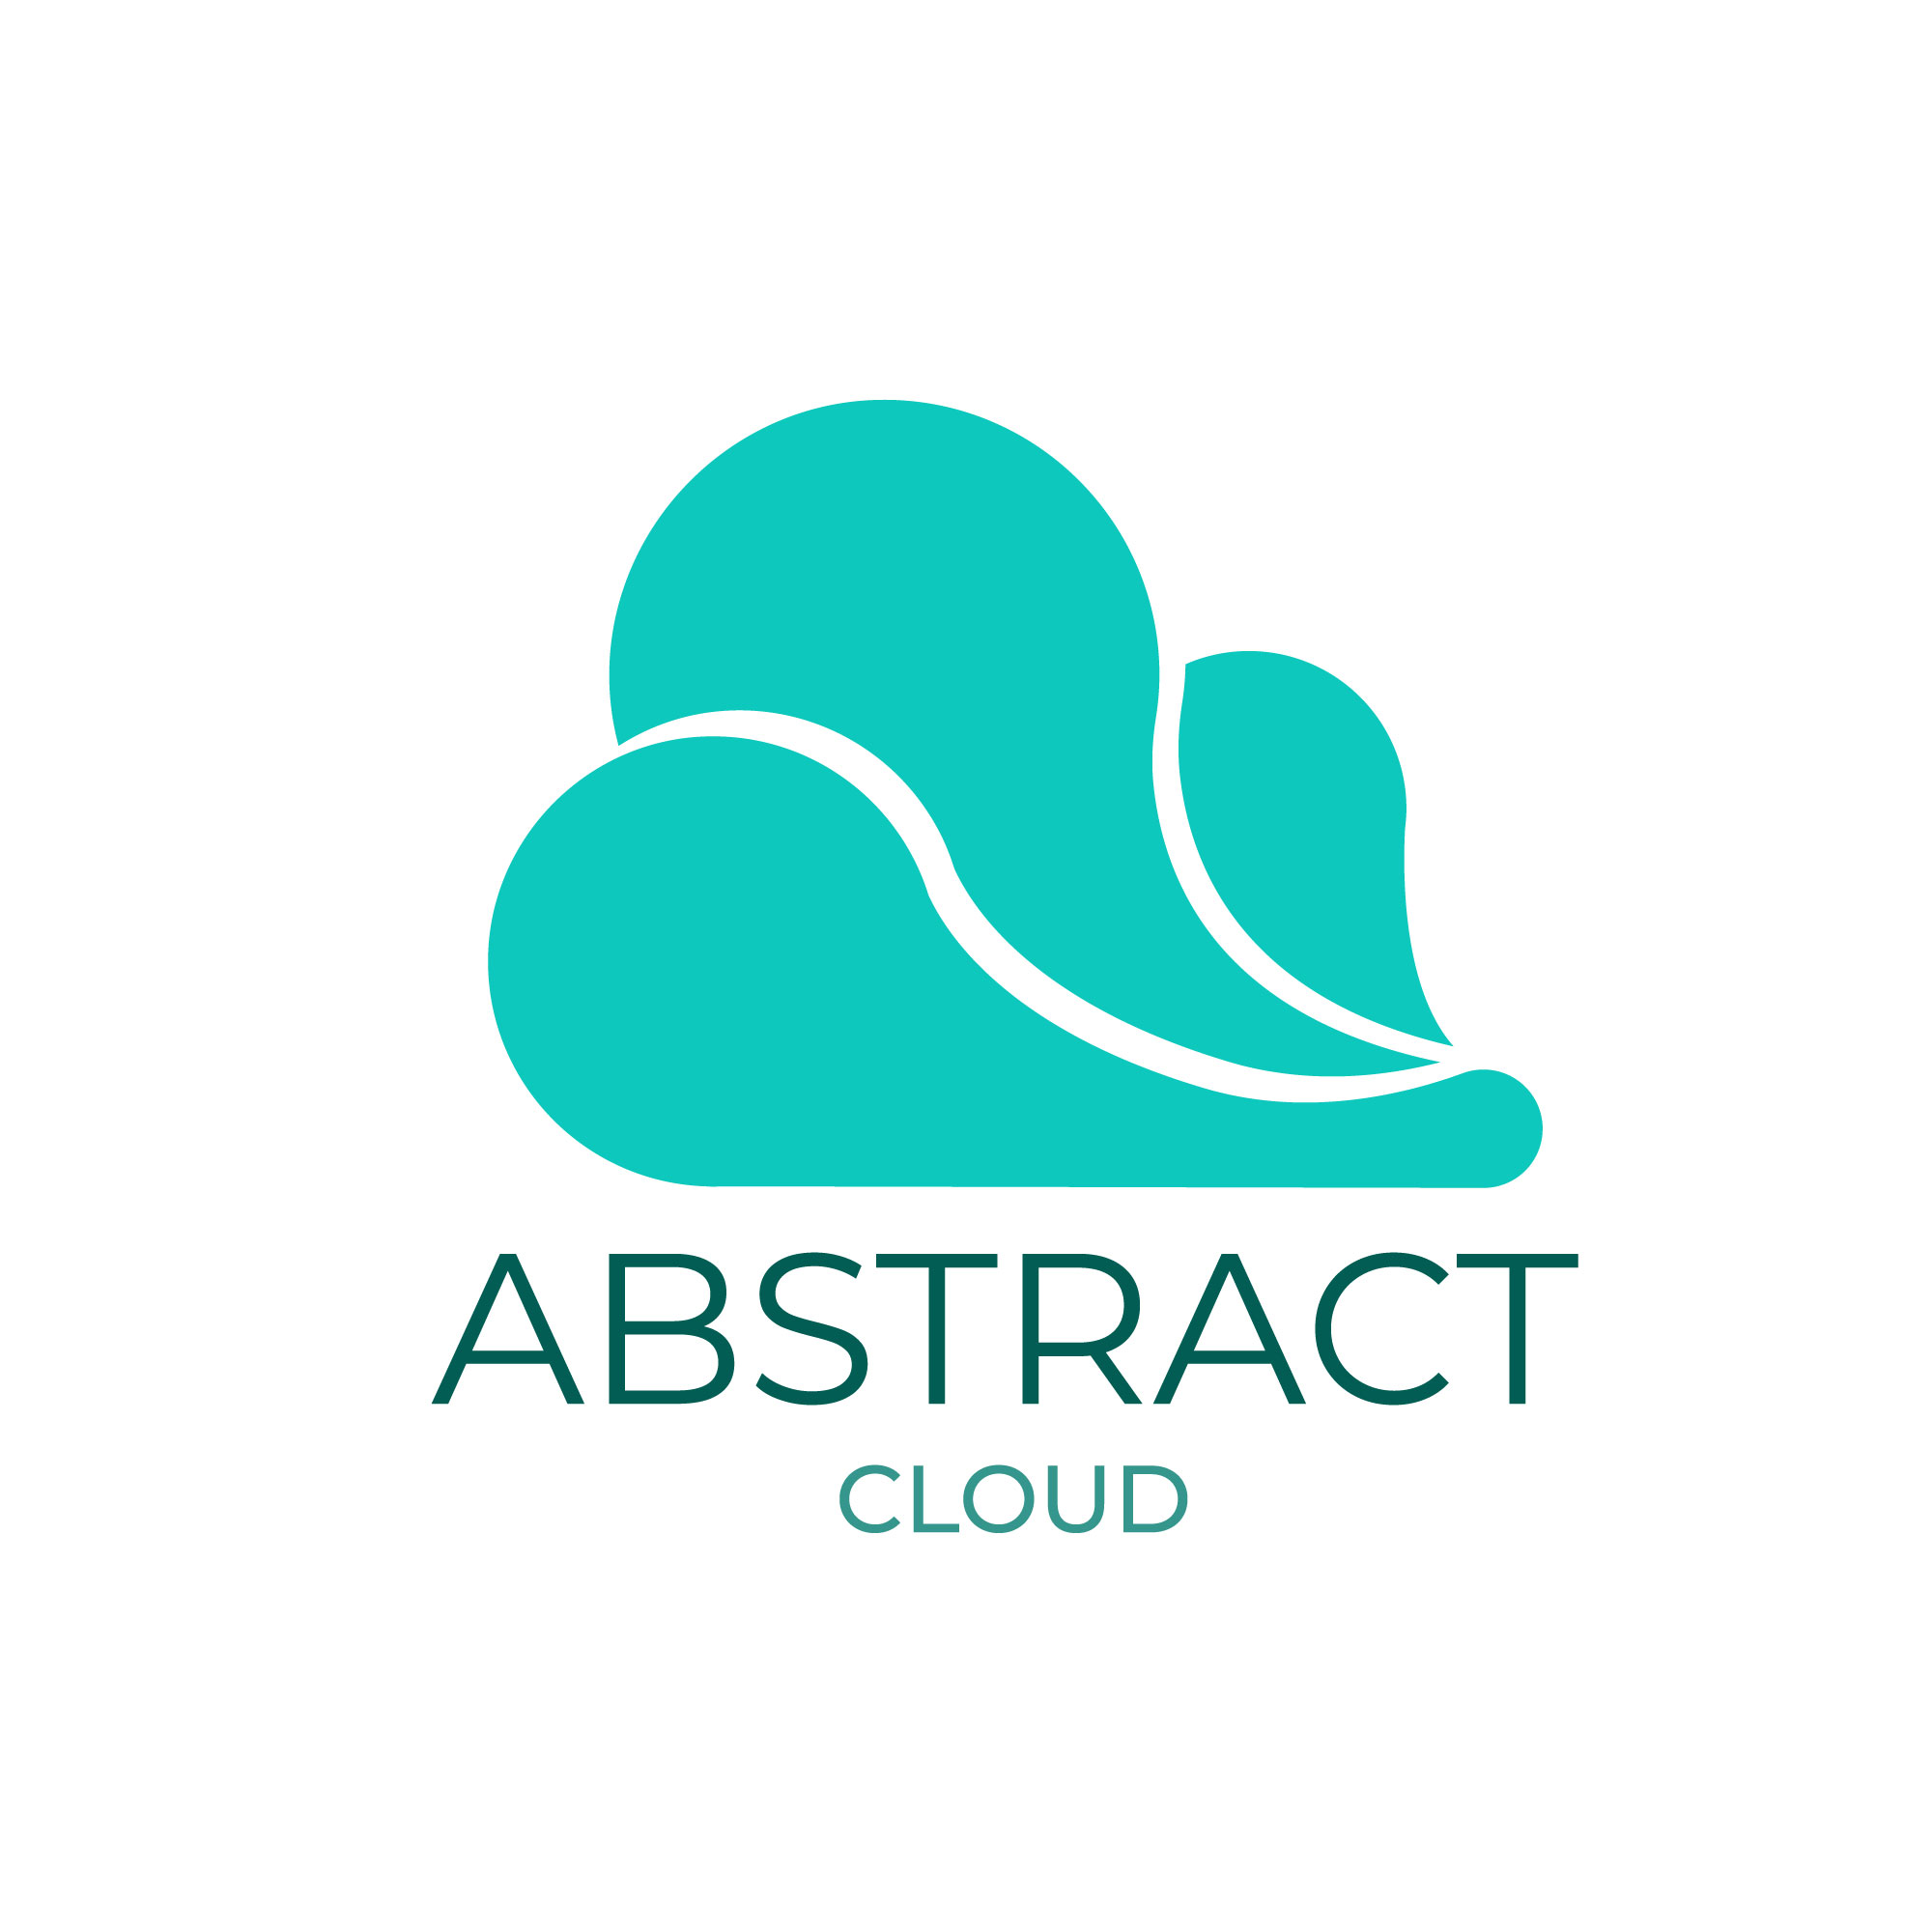 Abstract clouds logo for hosting storage agency